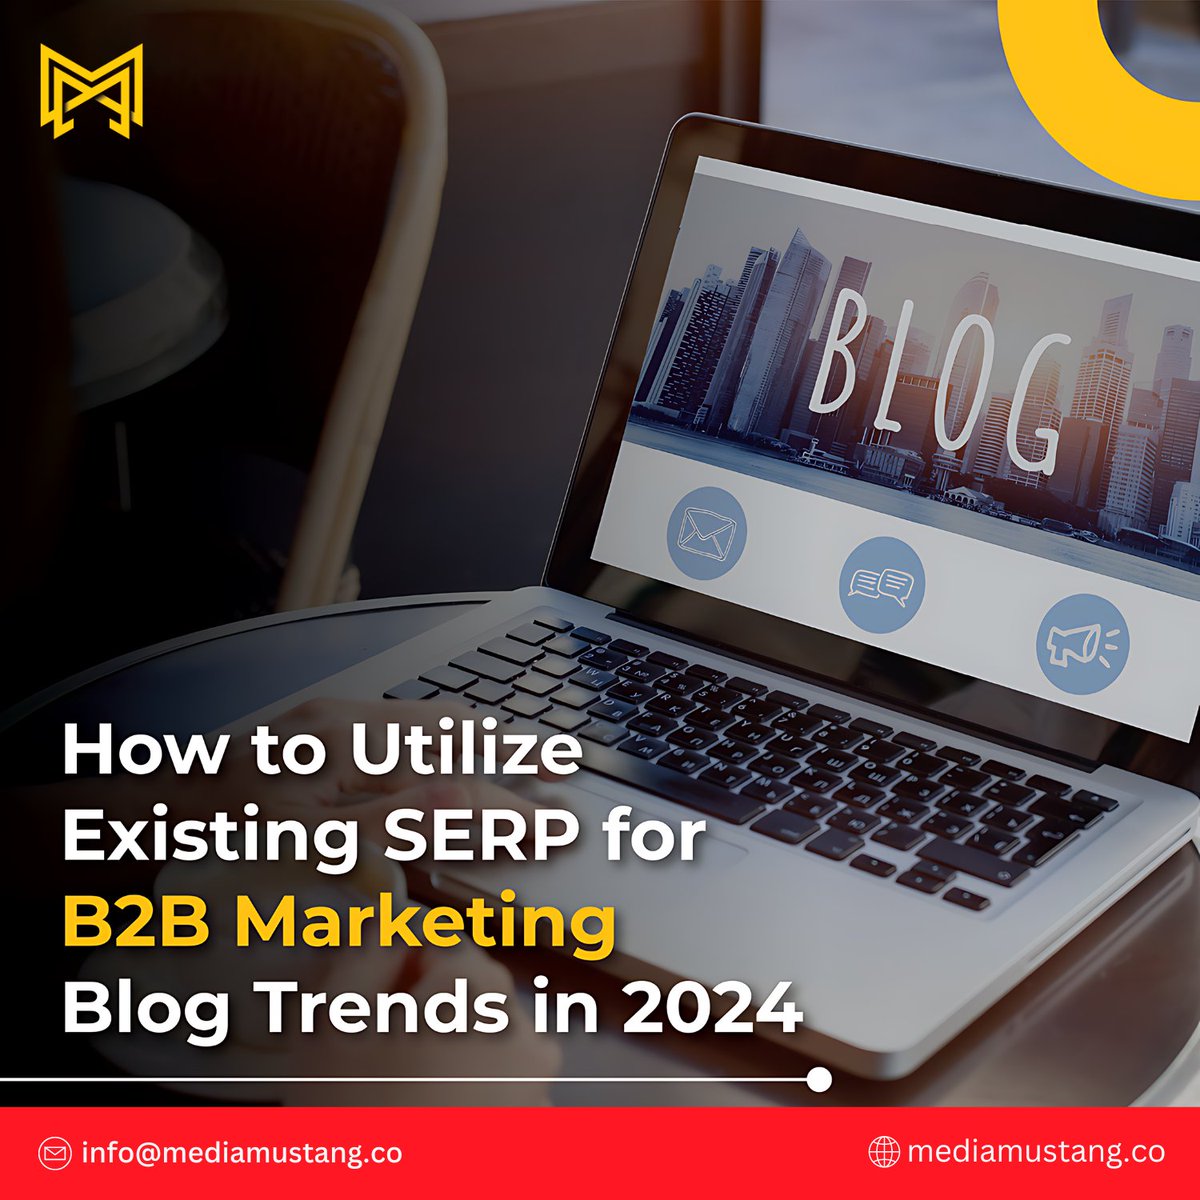 How to Utilize Existing SERP for B2B Marketing Blog Trends in 2024

Website :- mediamustang.co
Email :-  info@mediamustang.co

#B2BMarketing  #ContentMarketing  #SEOs  #DigitalMarketing  #SocialMediaMarketing